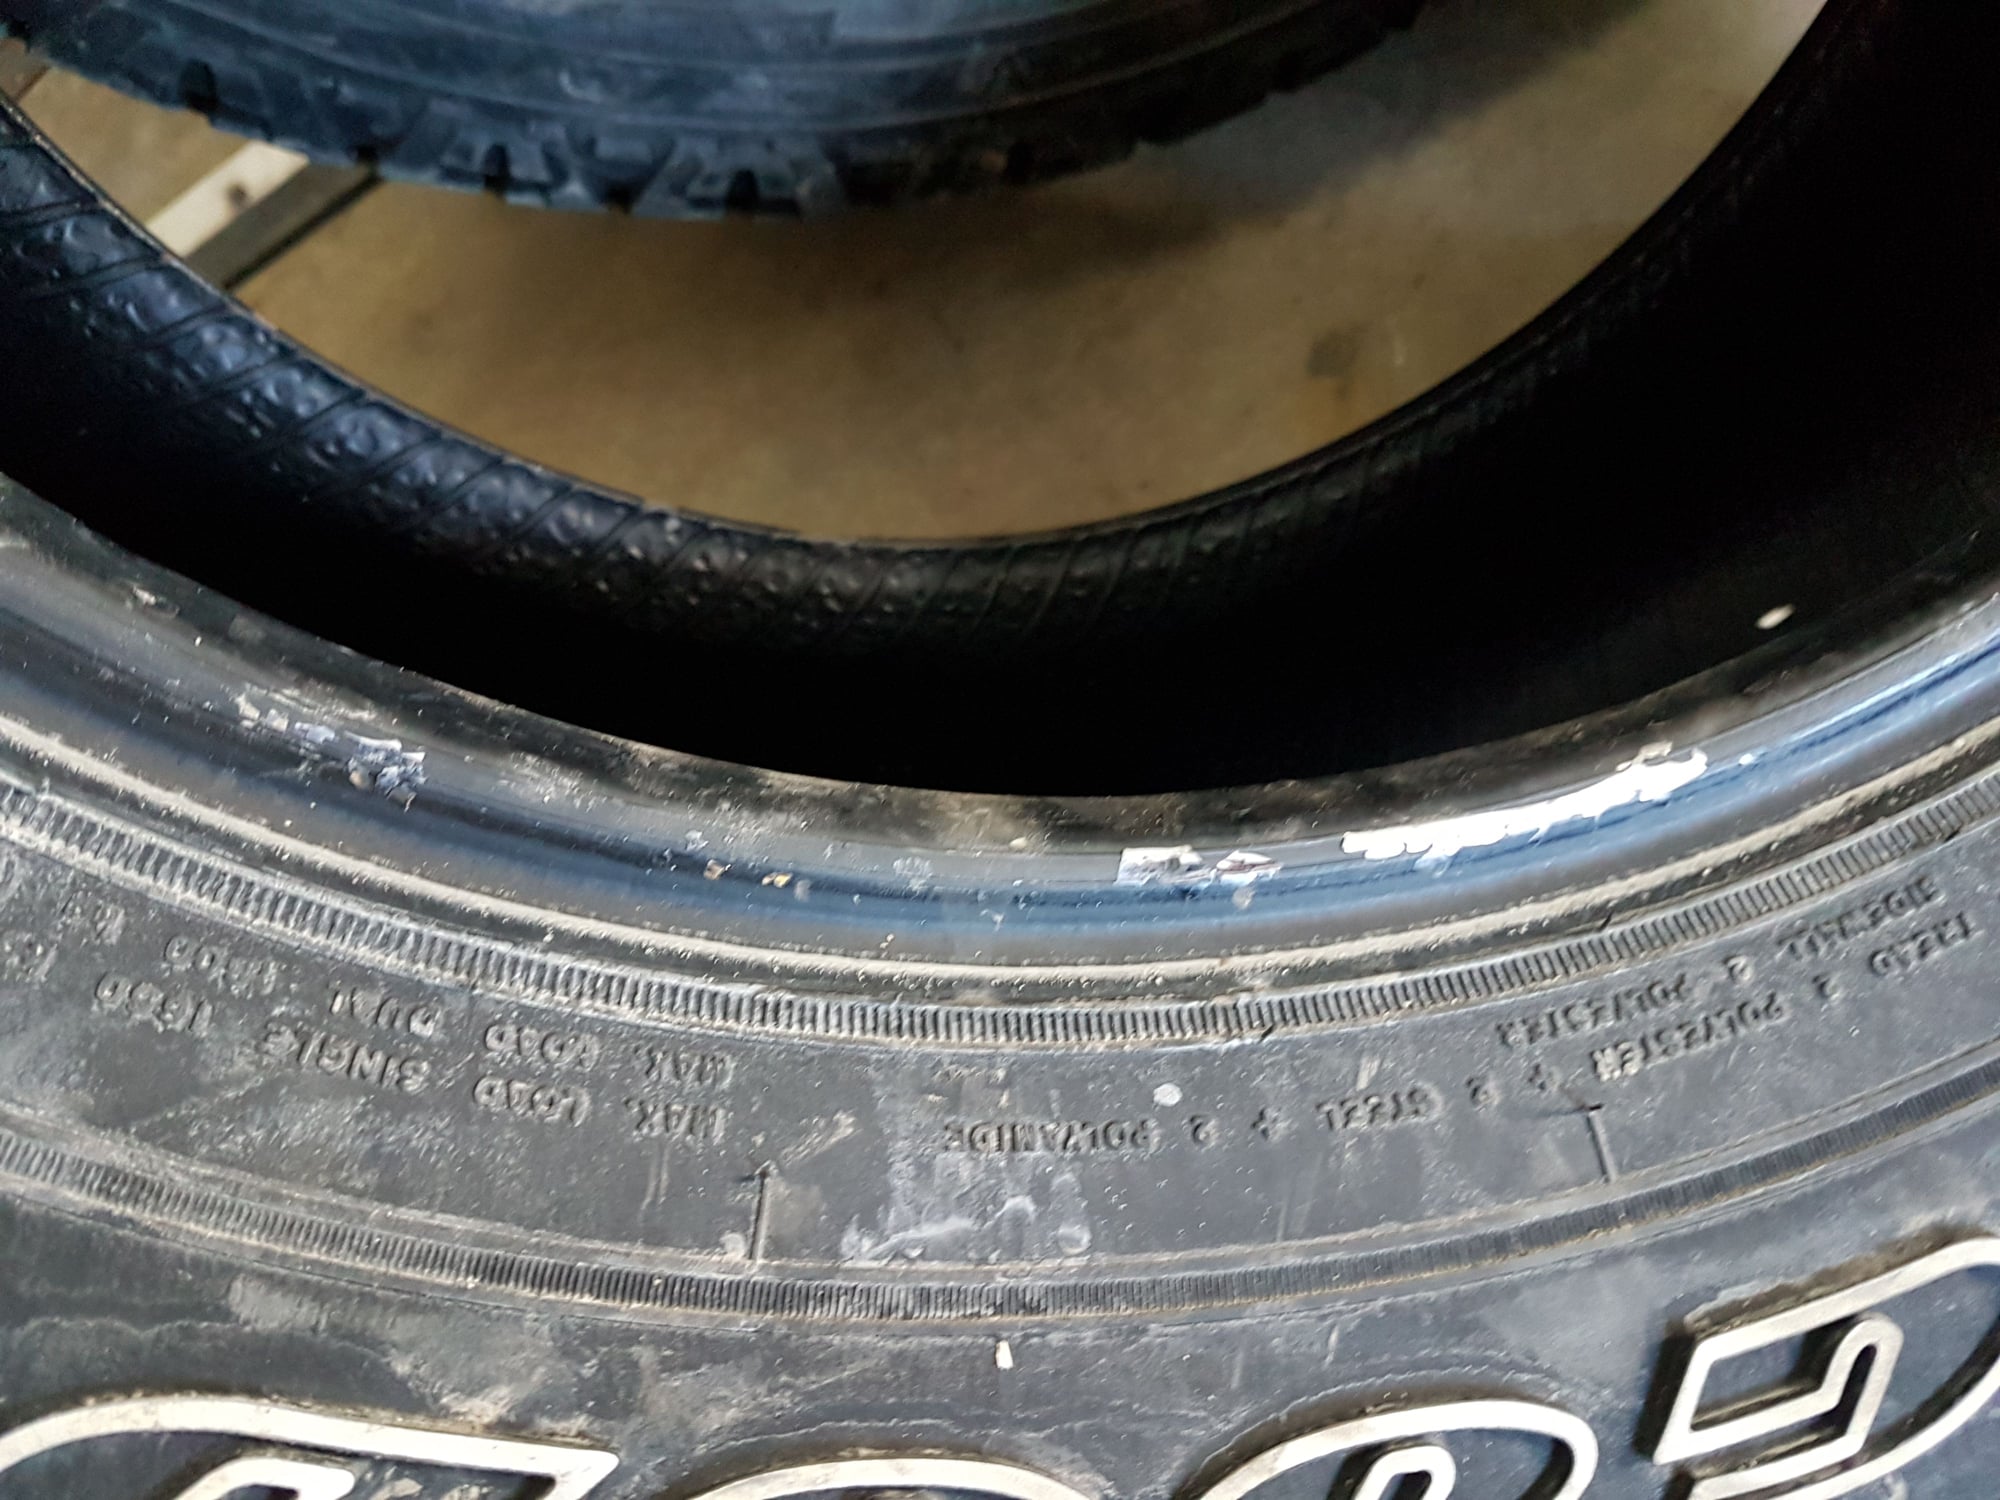 Rims peeling - Ford Truck Enthusiasts Forums